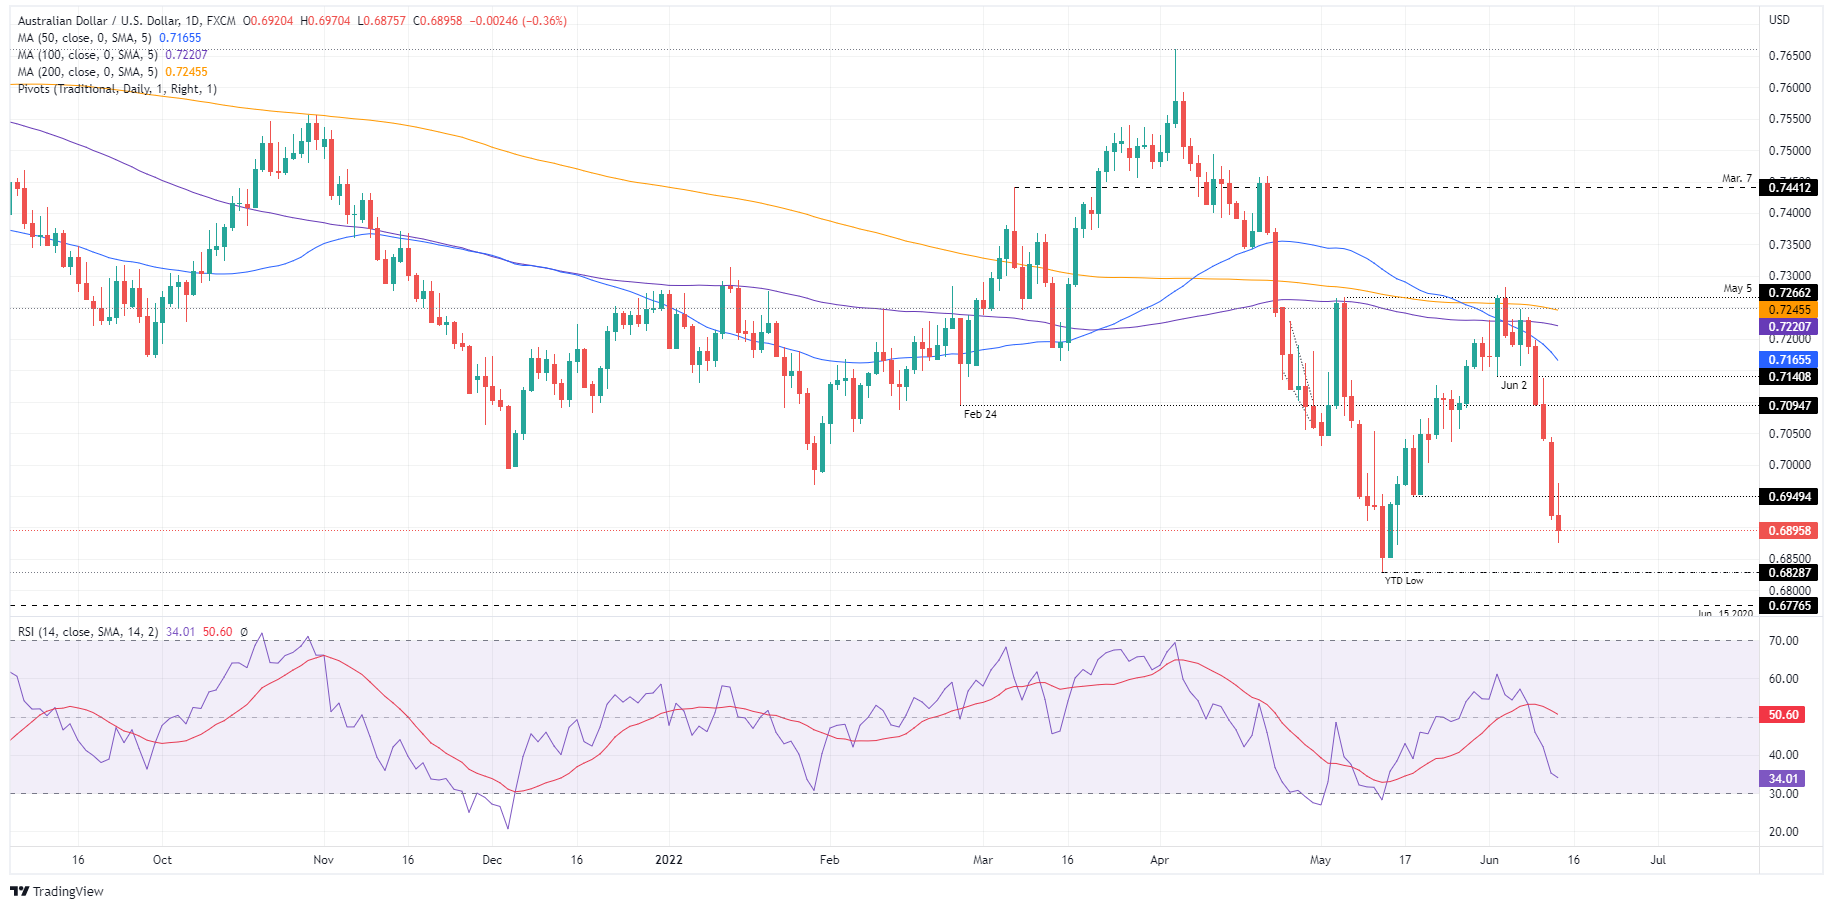 Sell the breakout of USDCAD - USD/CAD - vsa for October 13, 2021